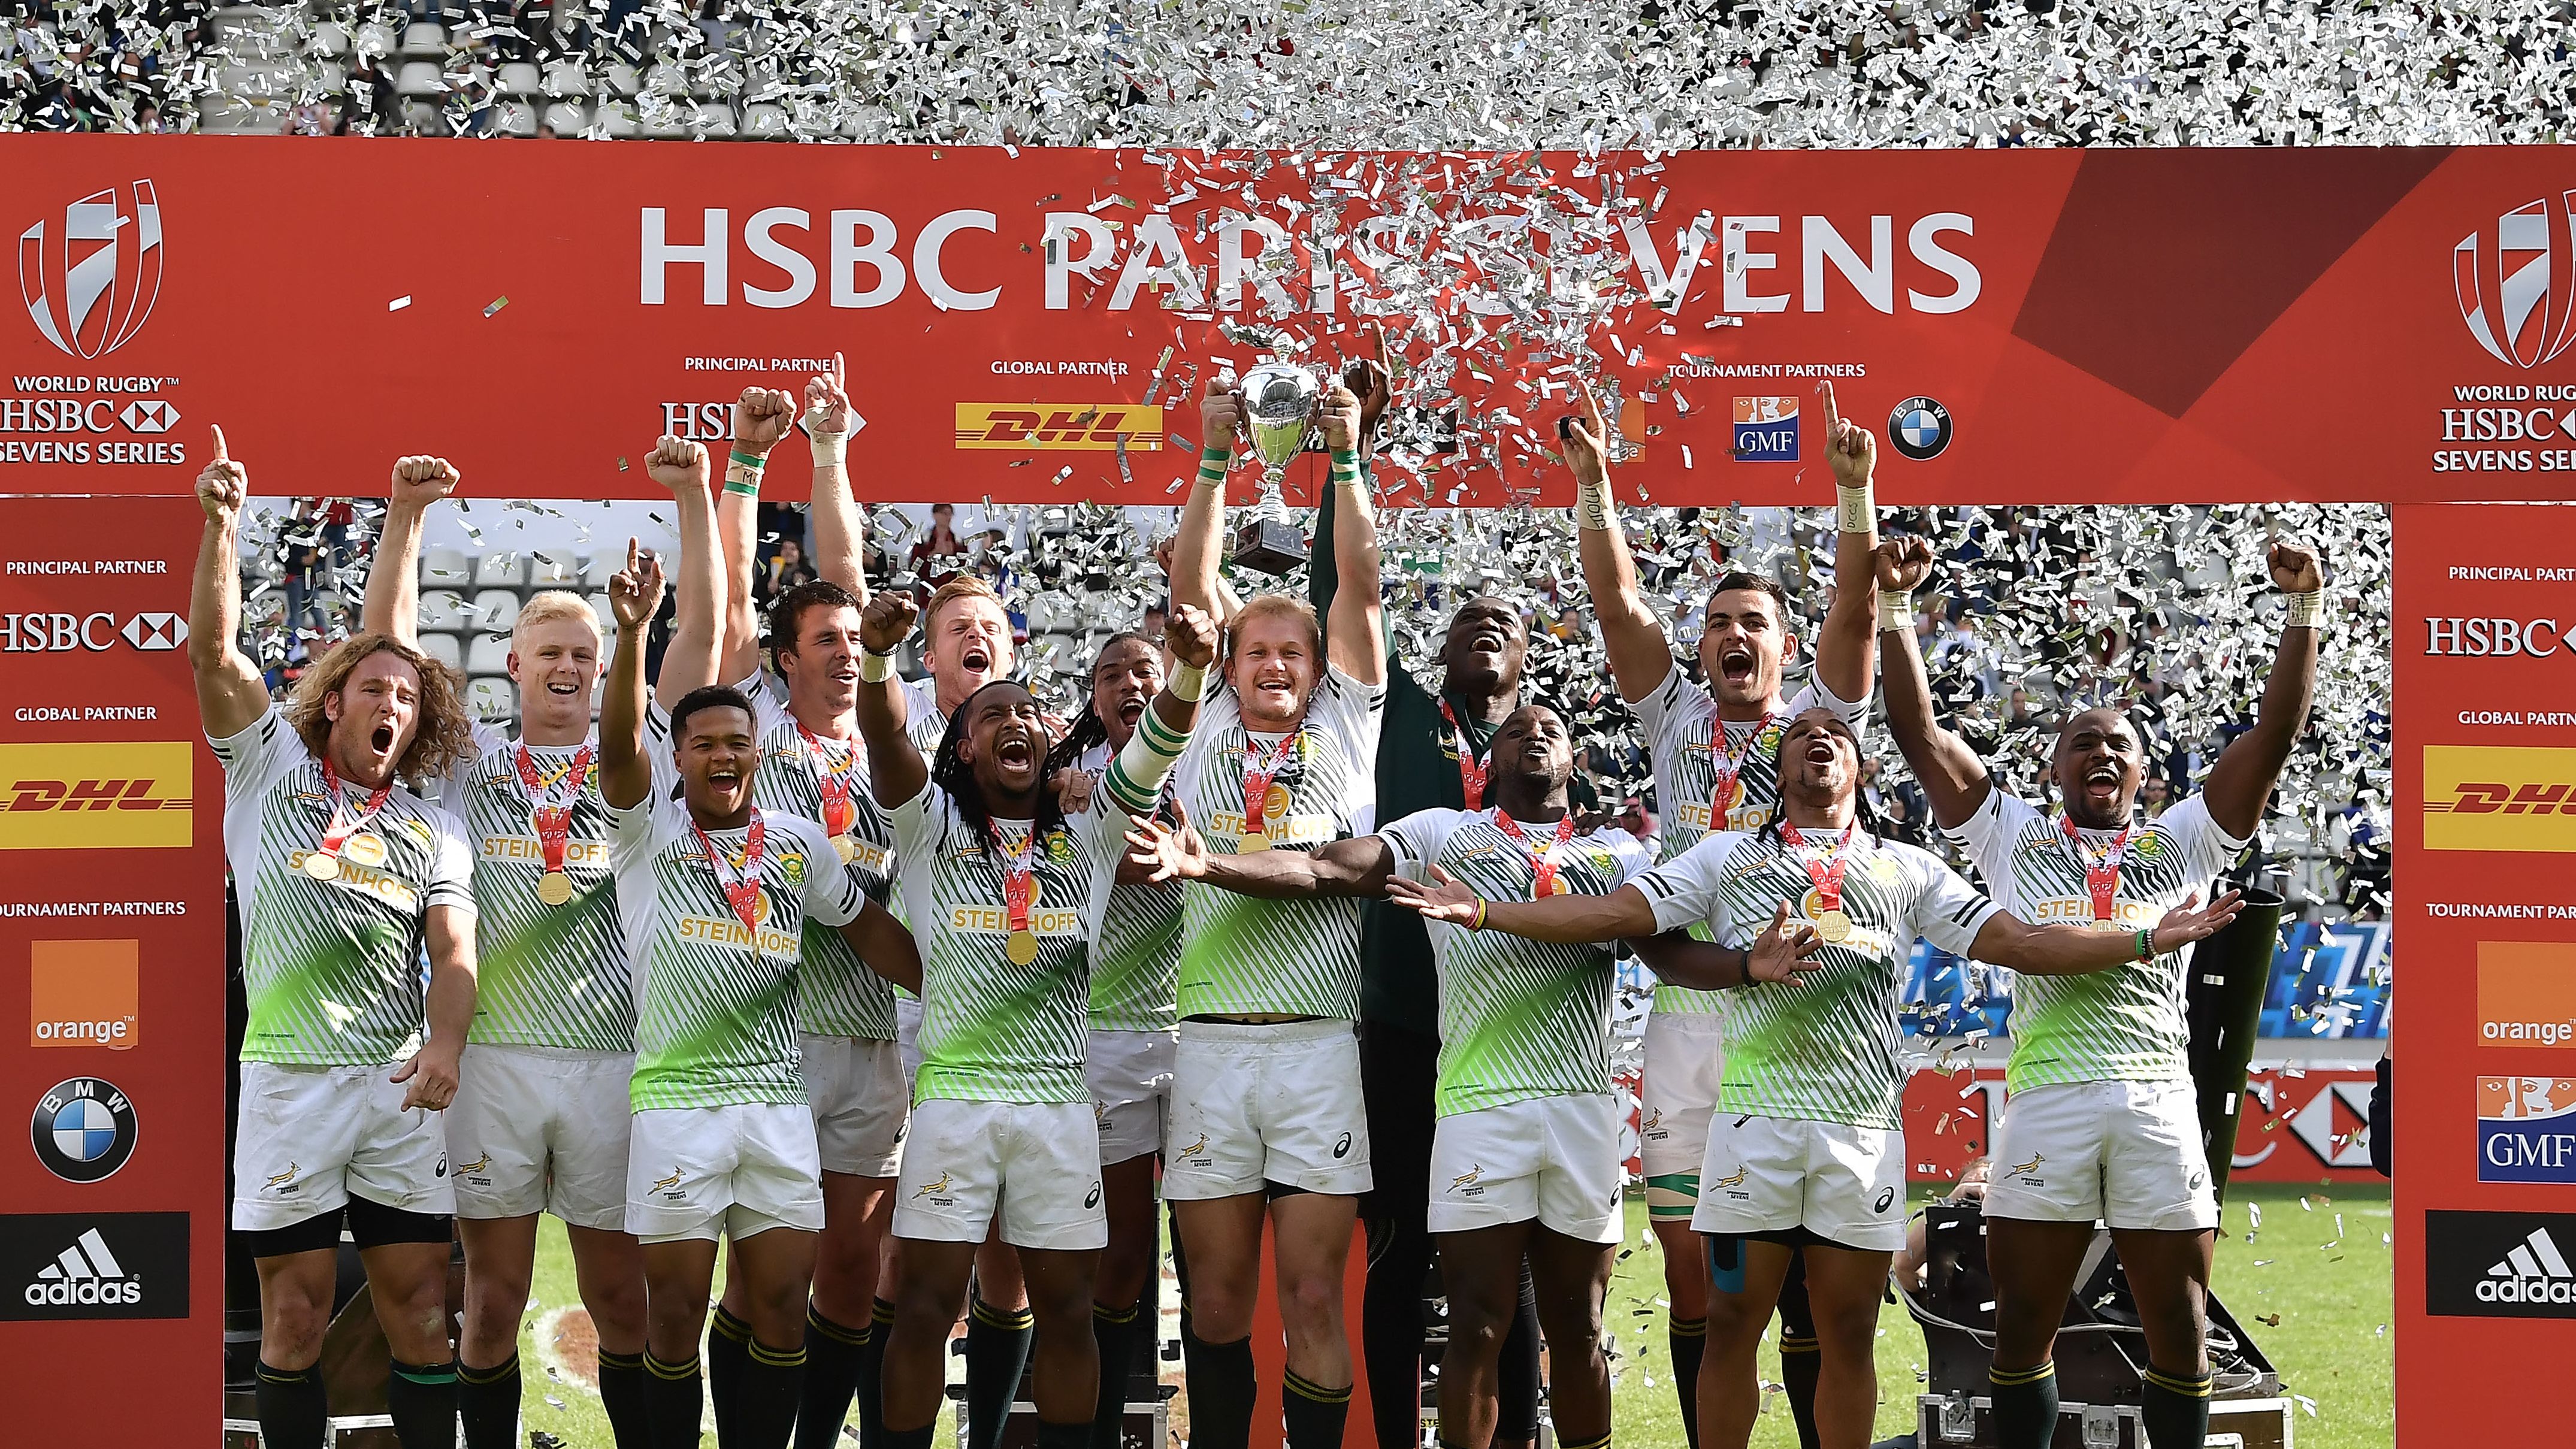 South Africa lifts the World Rugby Sevens Series trophy at Stade Jean Bouin in Paris after beating Scotland 15-5 in the final.